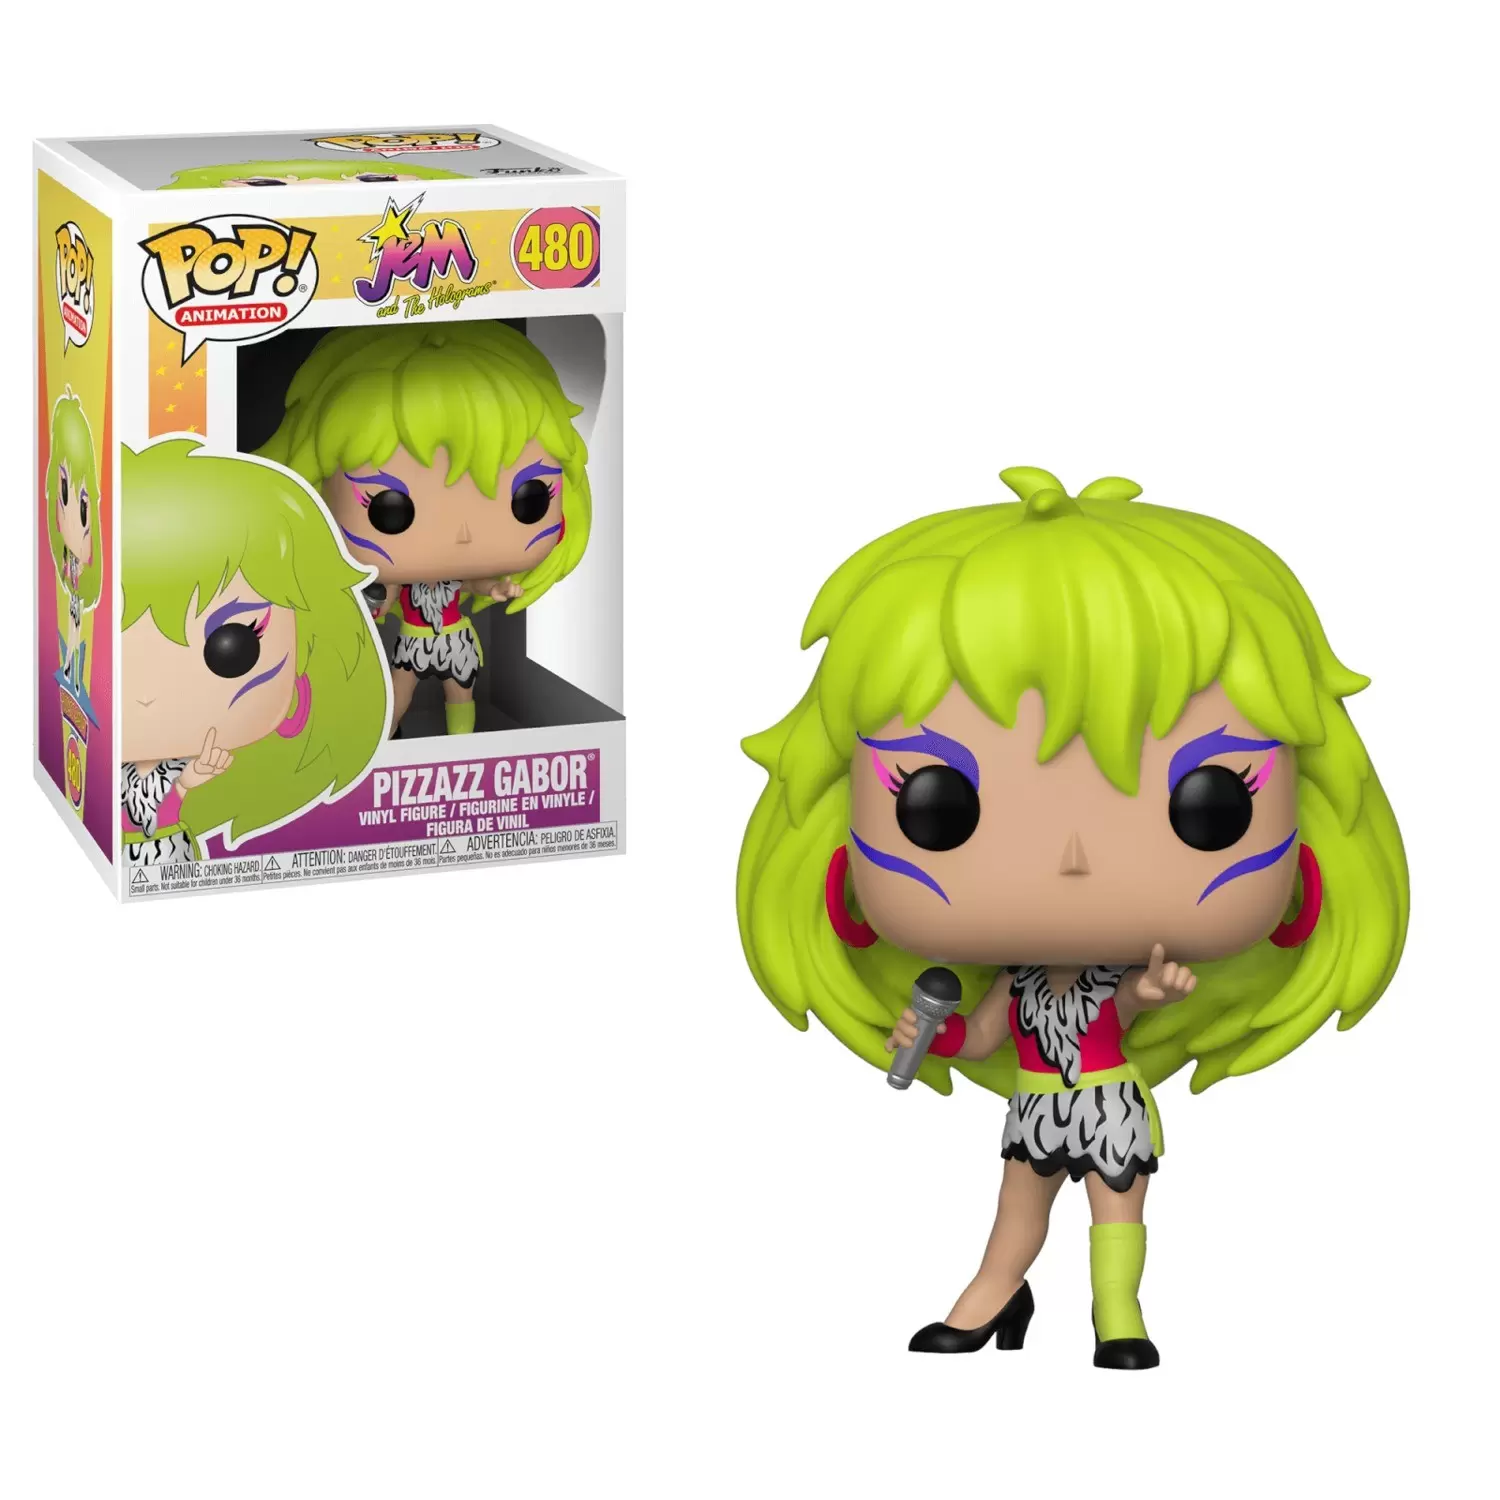 POP! Animation - Jem and the Holograms - Pizzazz Gabor